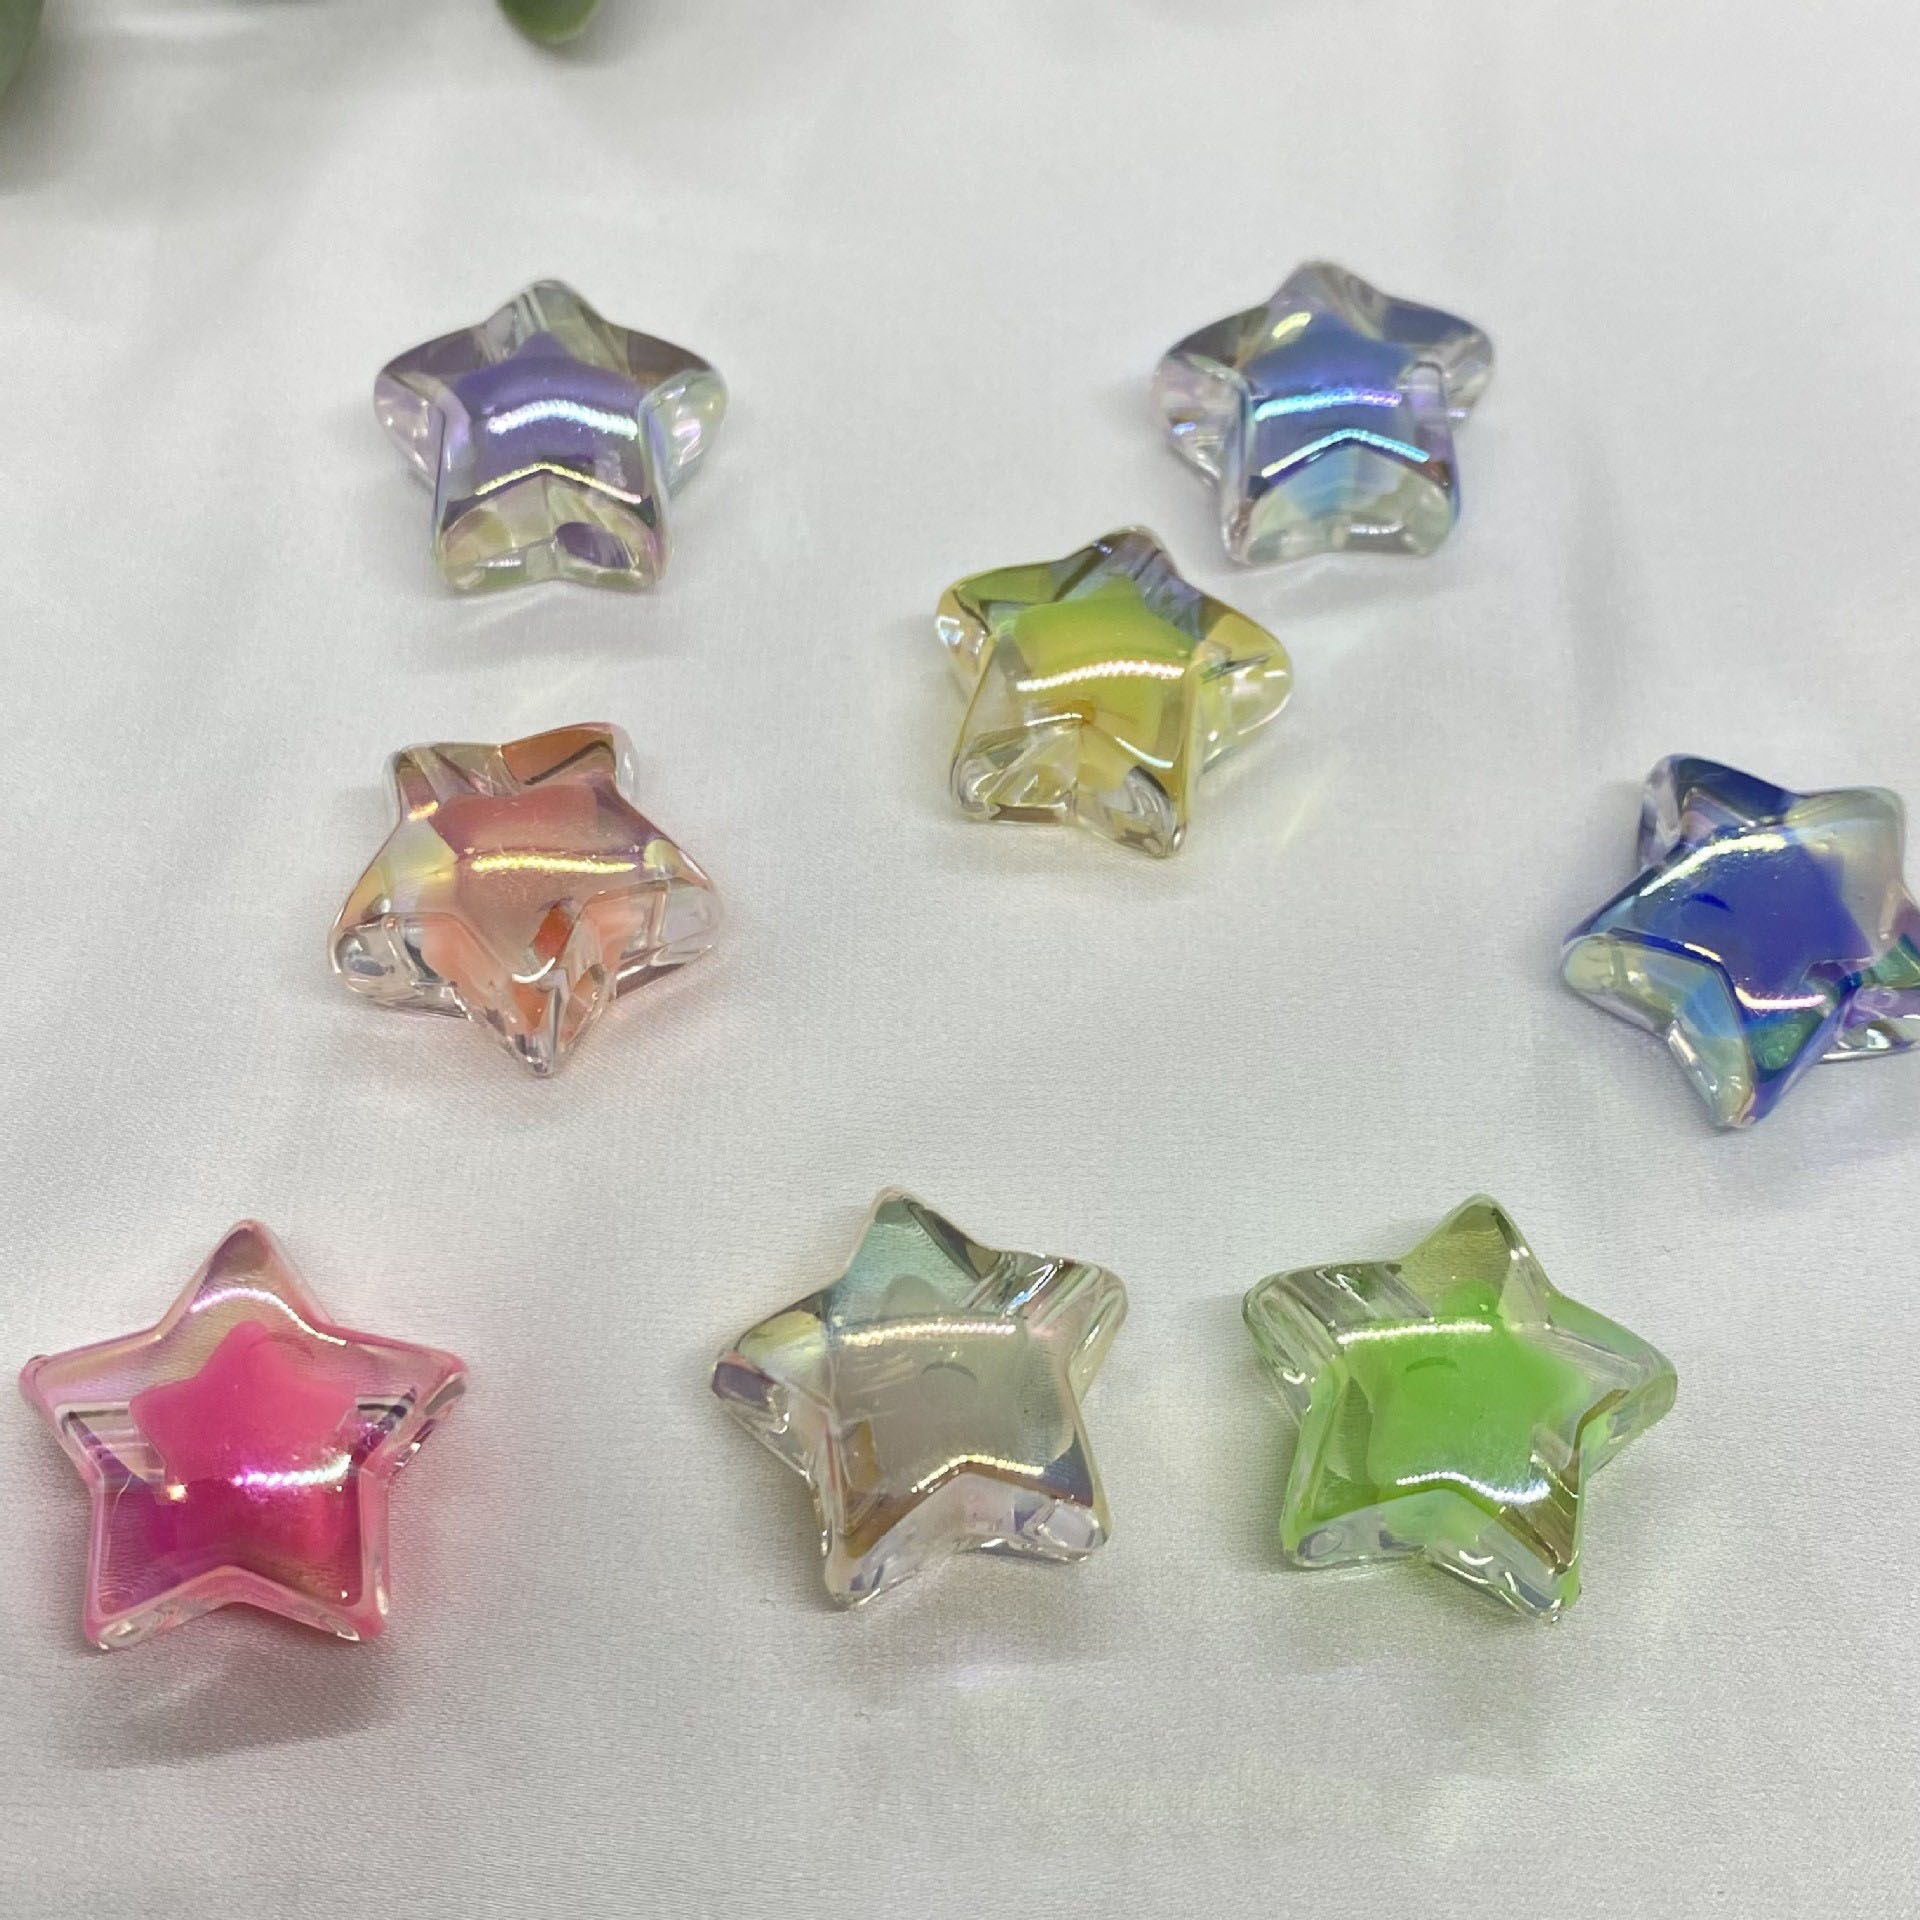 3:Five-pointed star mix 20mm